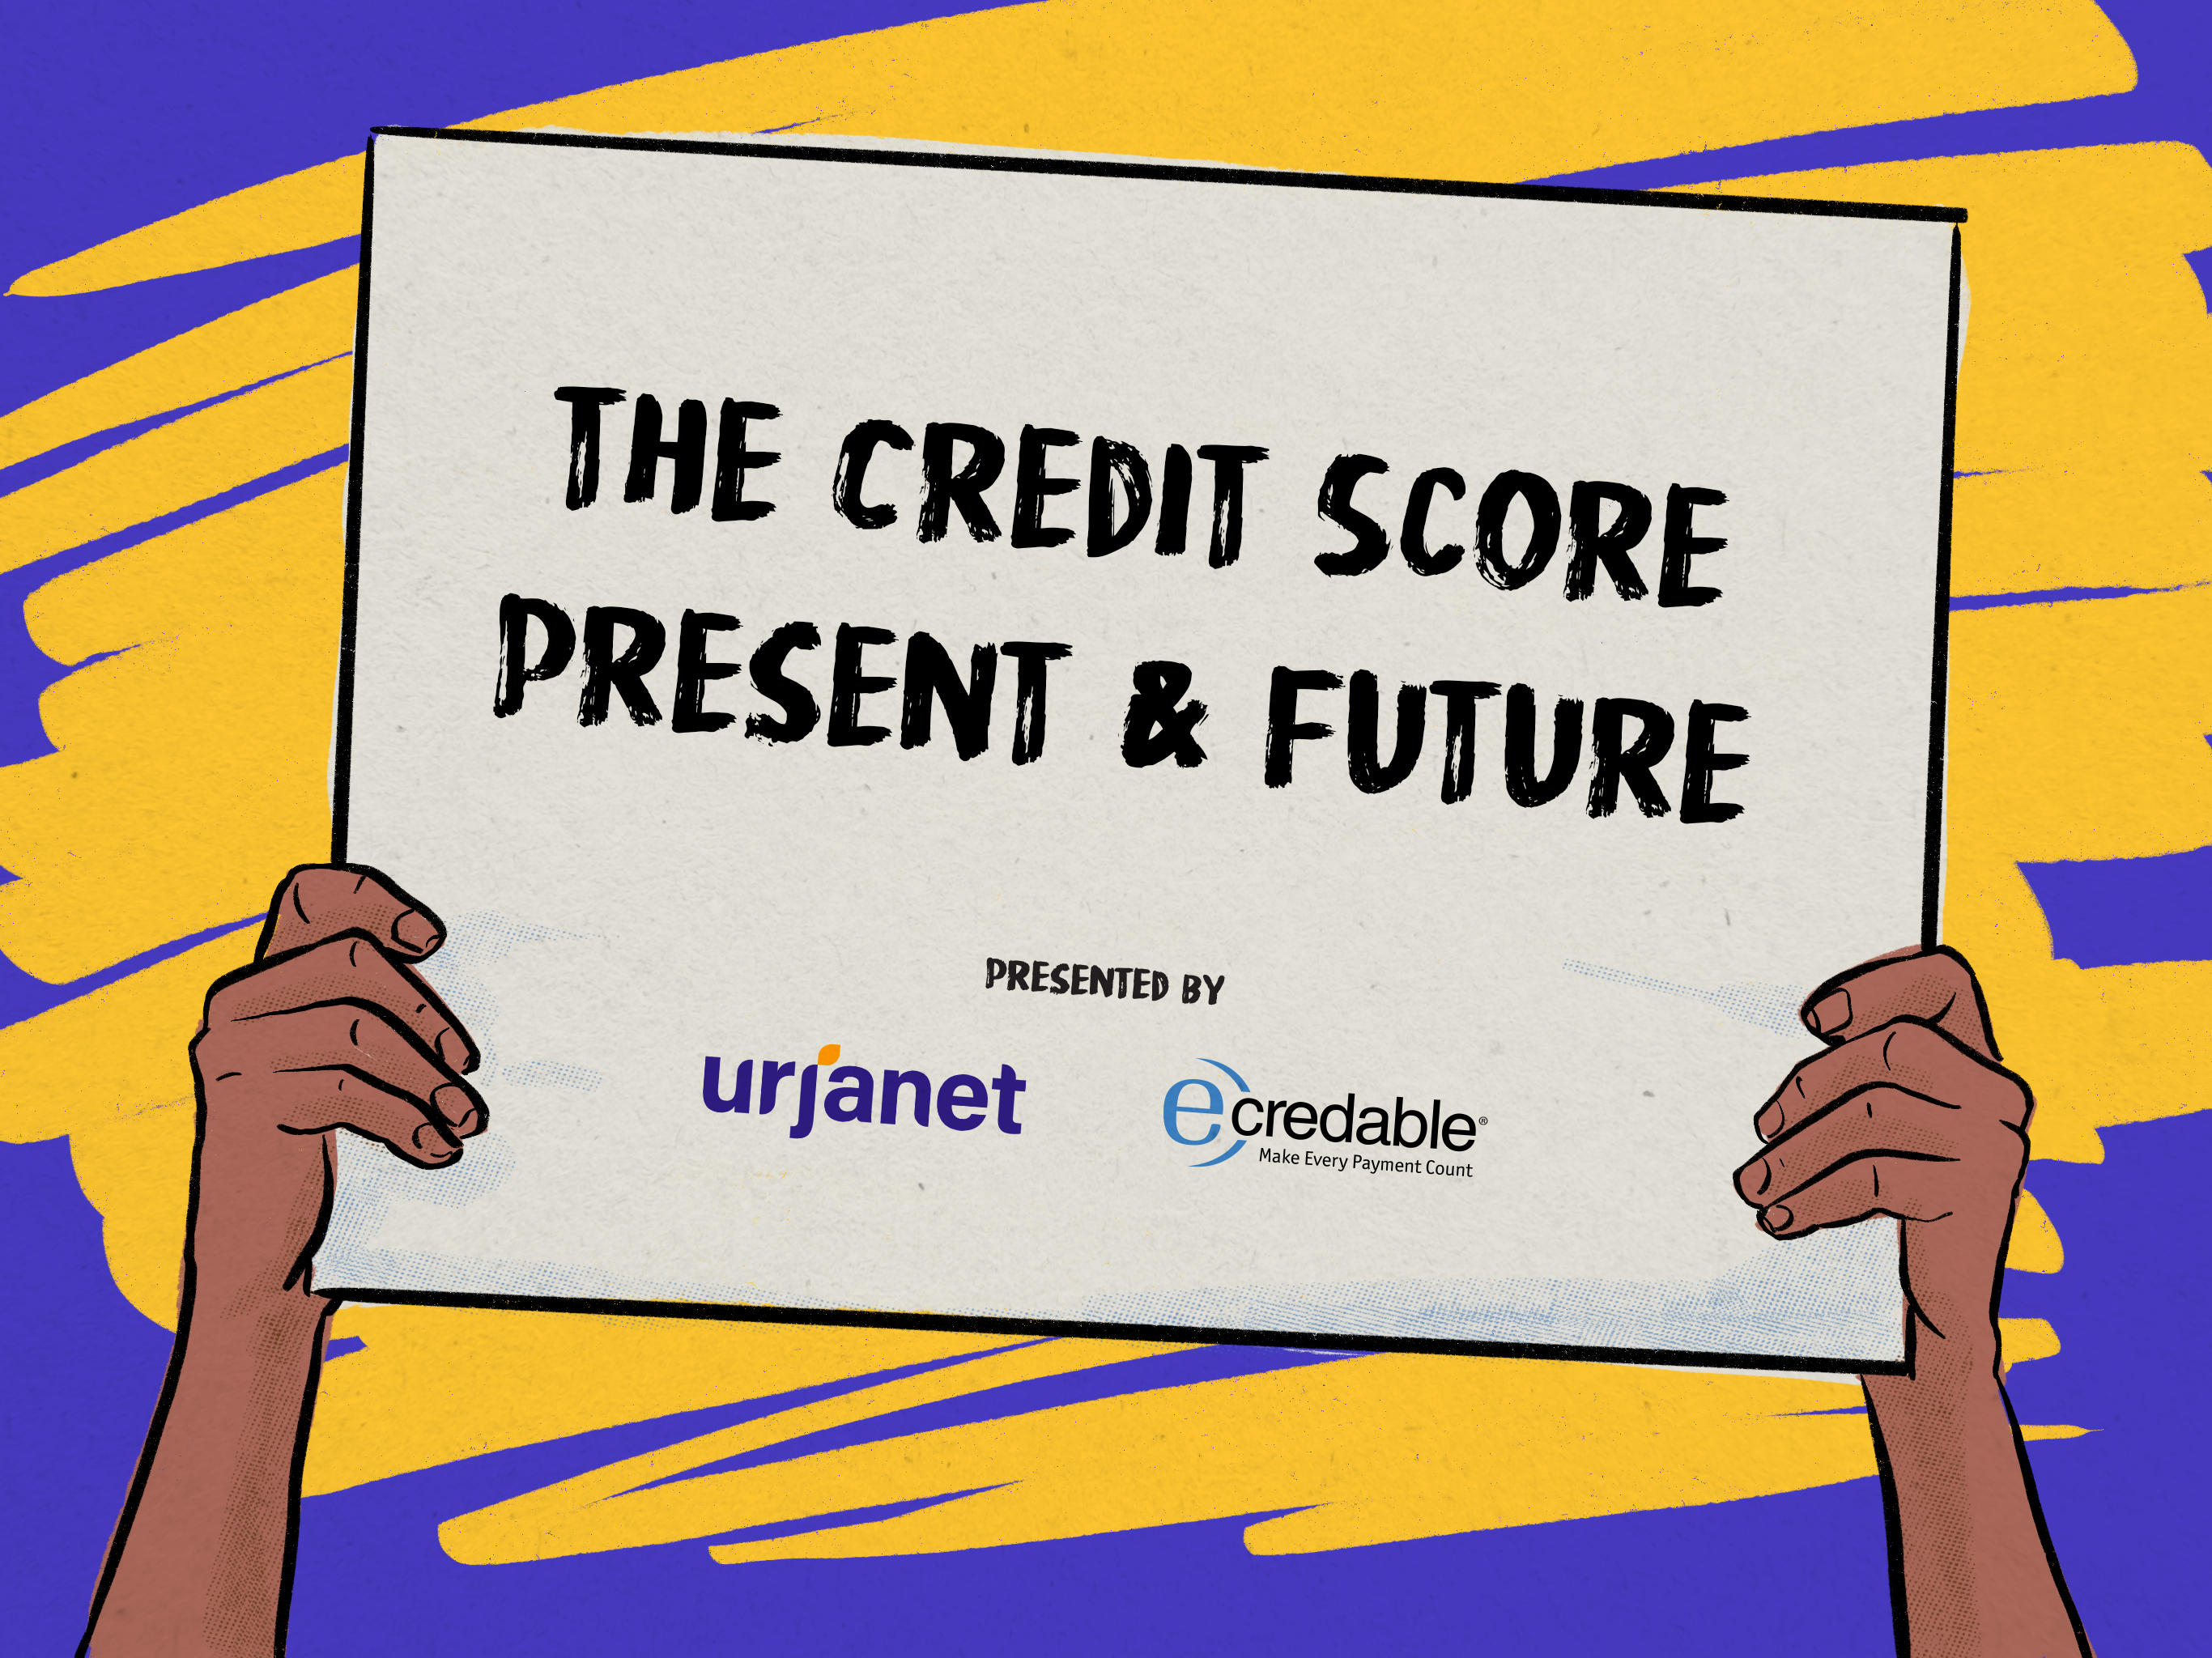 The Past, Present, and Future of Credit Scoring